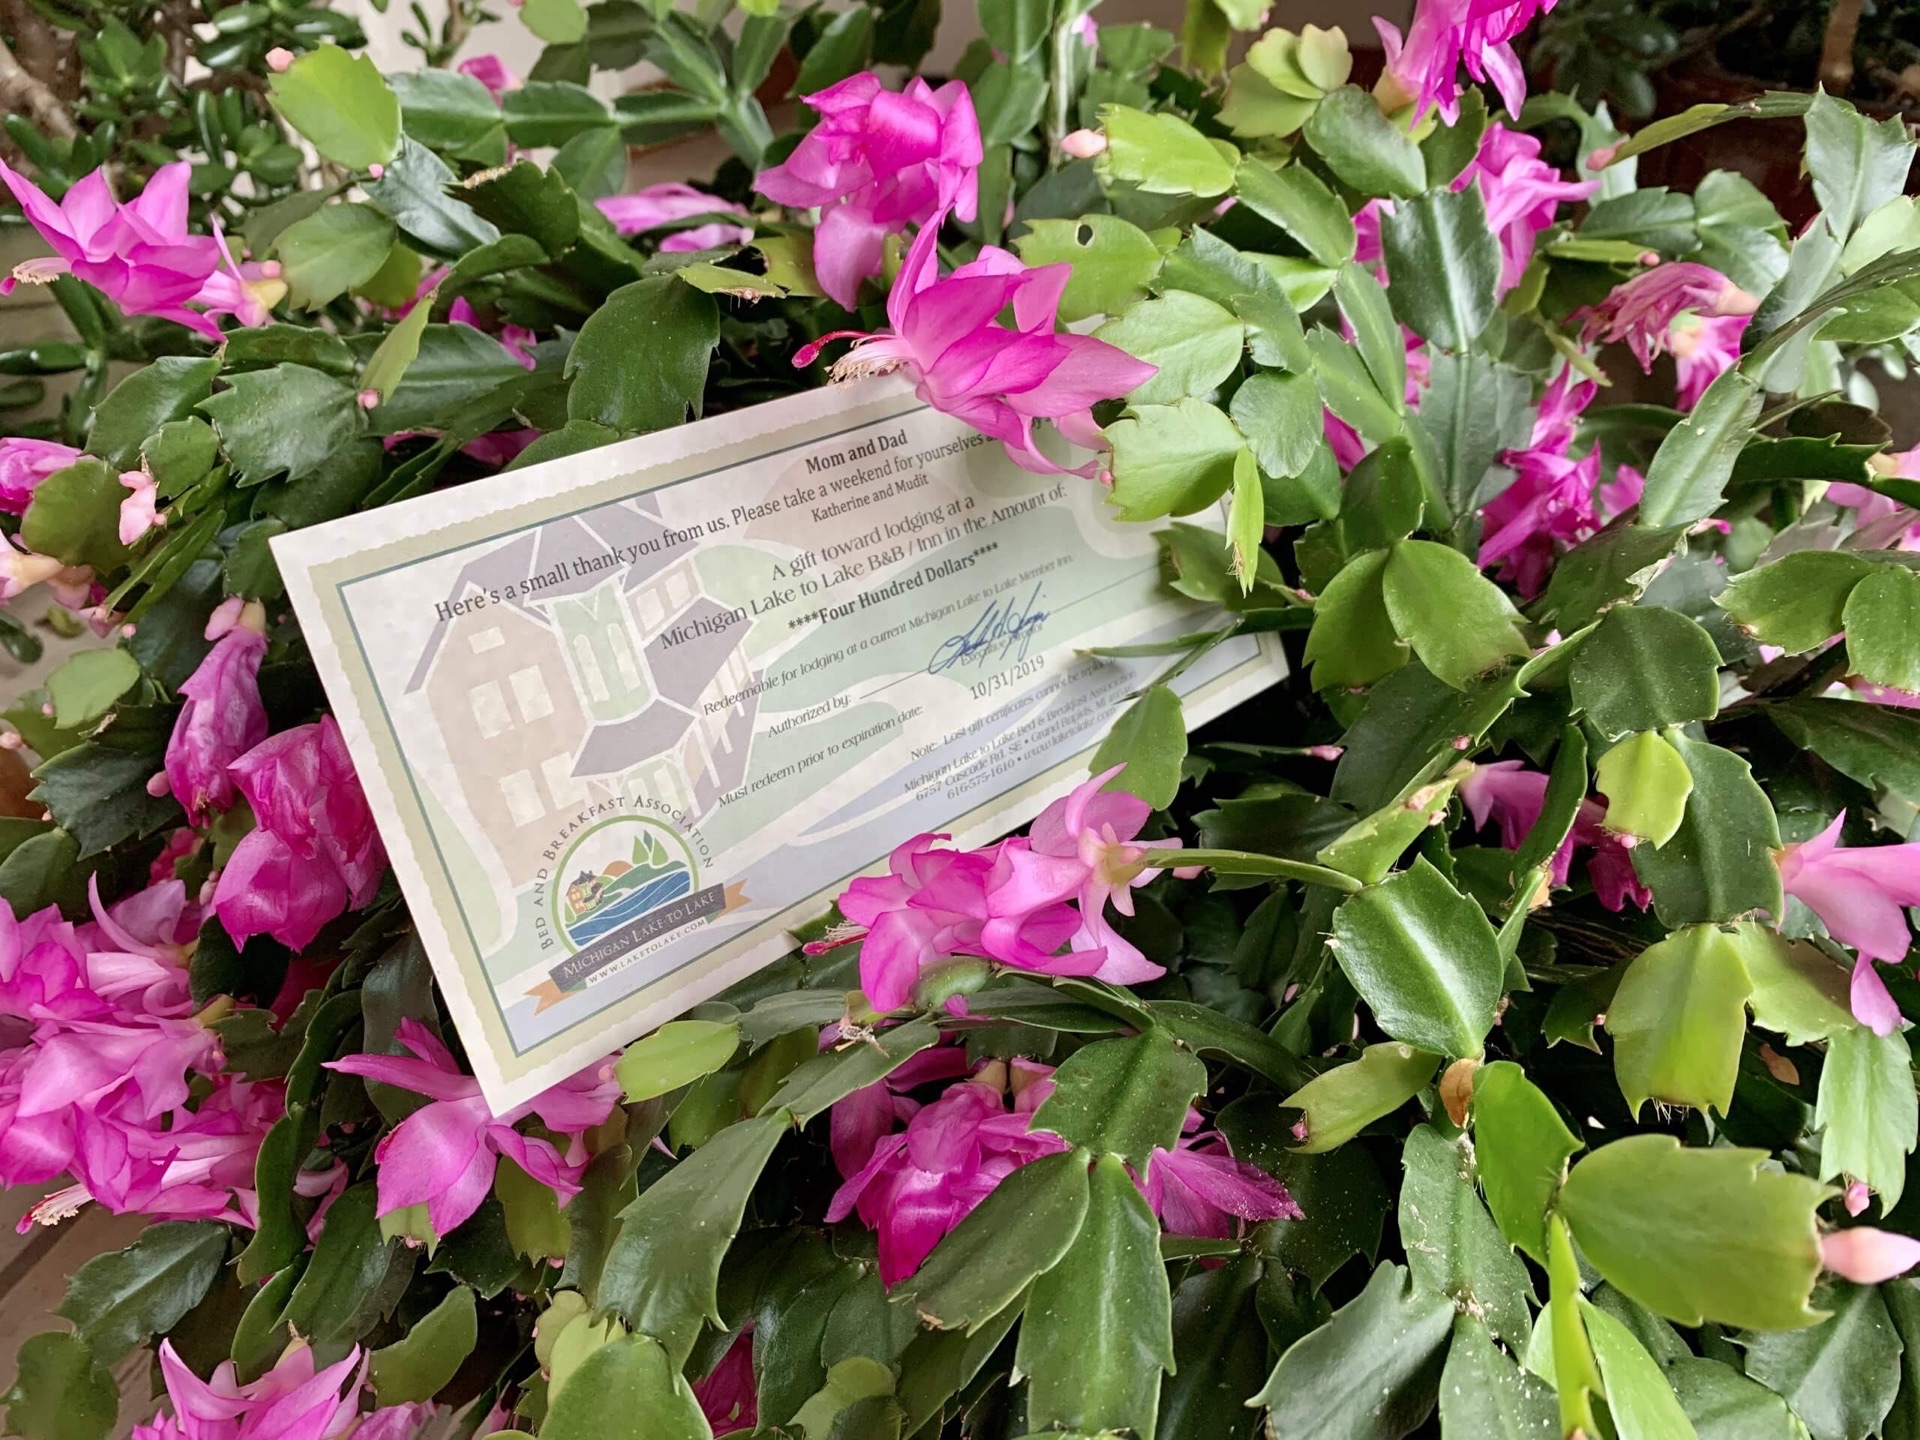 MBBA gift certificate and Christmas cactus